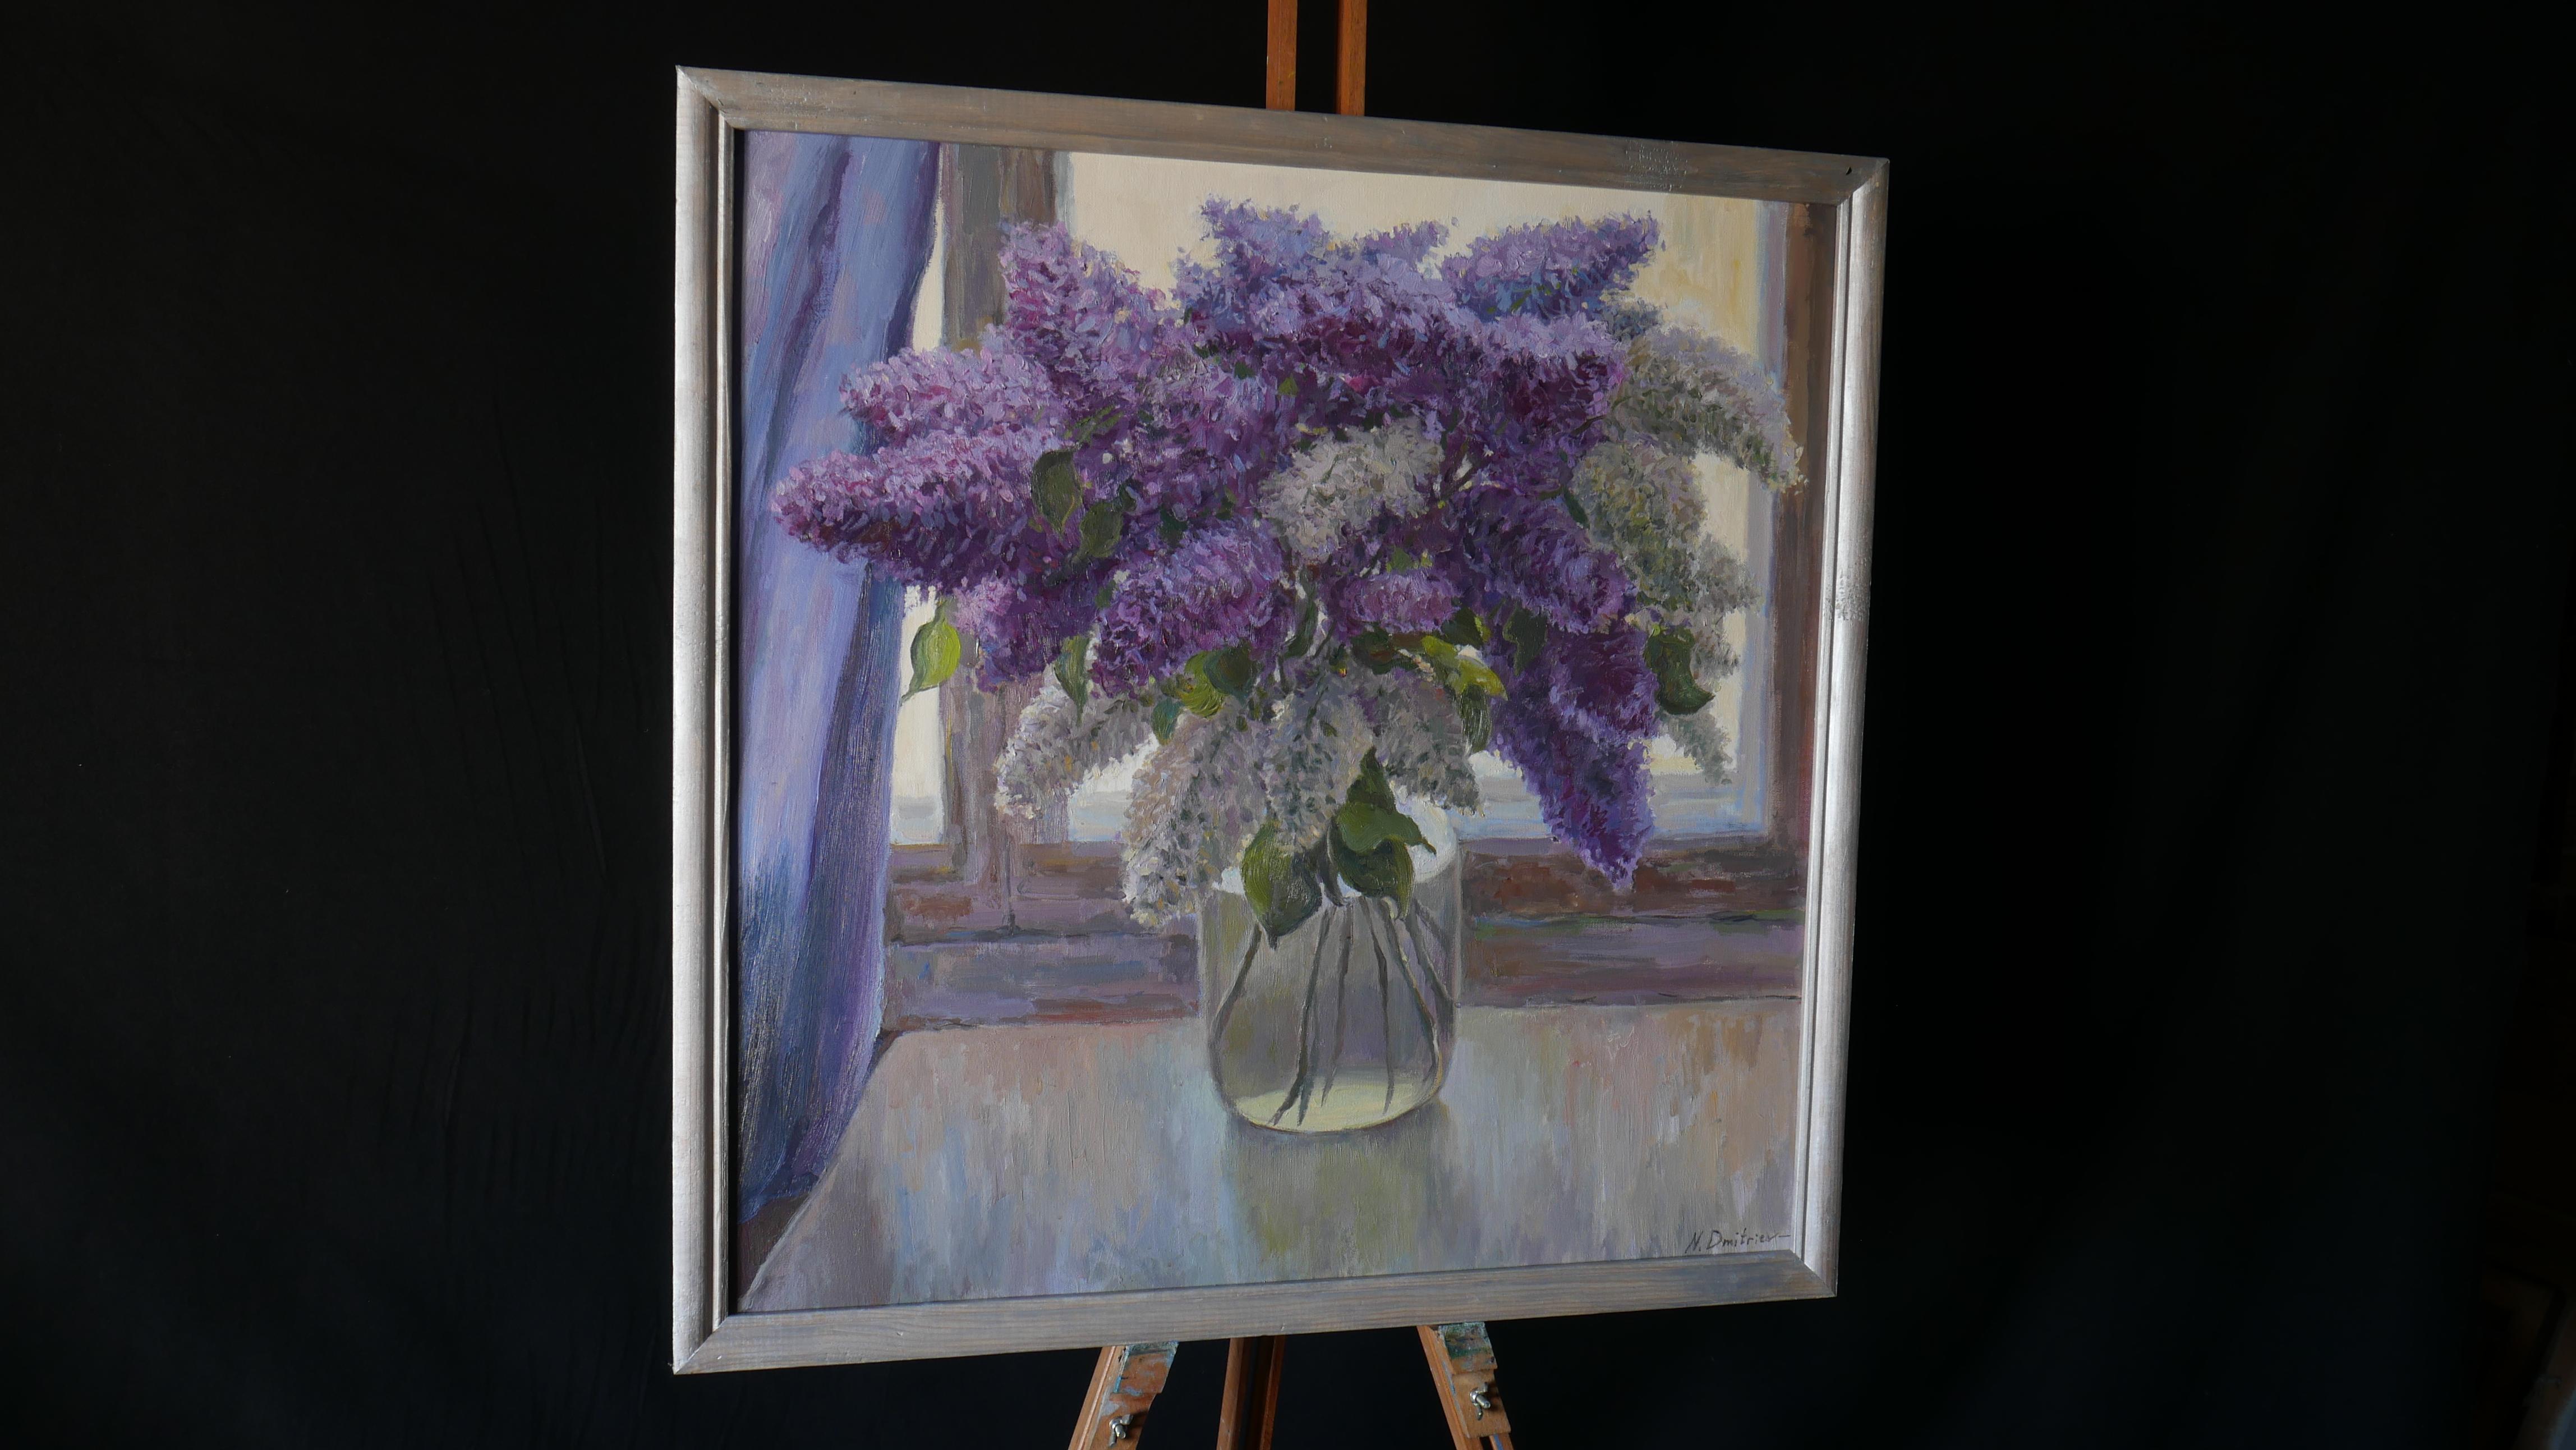 The Lush Bouquet Of Lilacs Near The Light Window - lilacs still life painting - Impressionist Painting by Nikolay Dmitriev